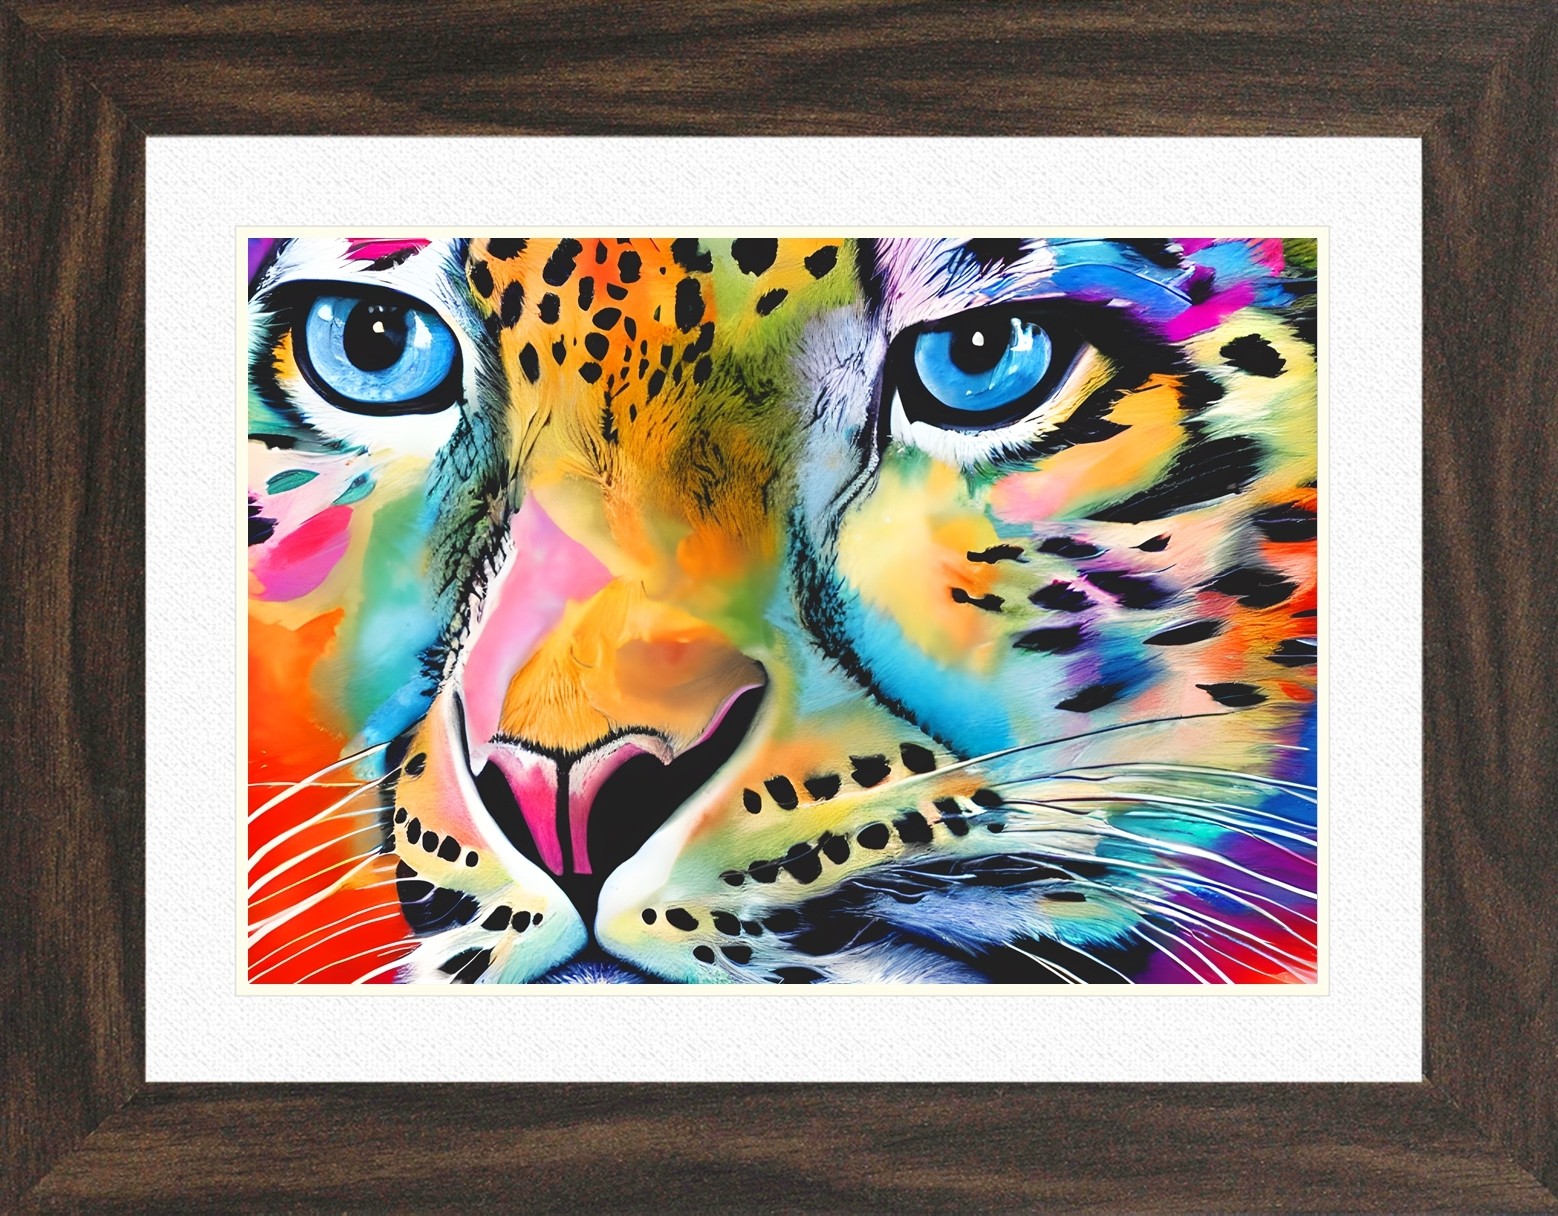 Snow Leopard Animal Picture Framed Colourful Abstract Art (A4 Walnut Frame)